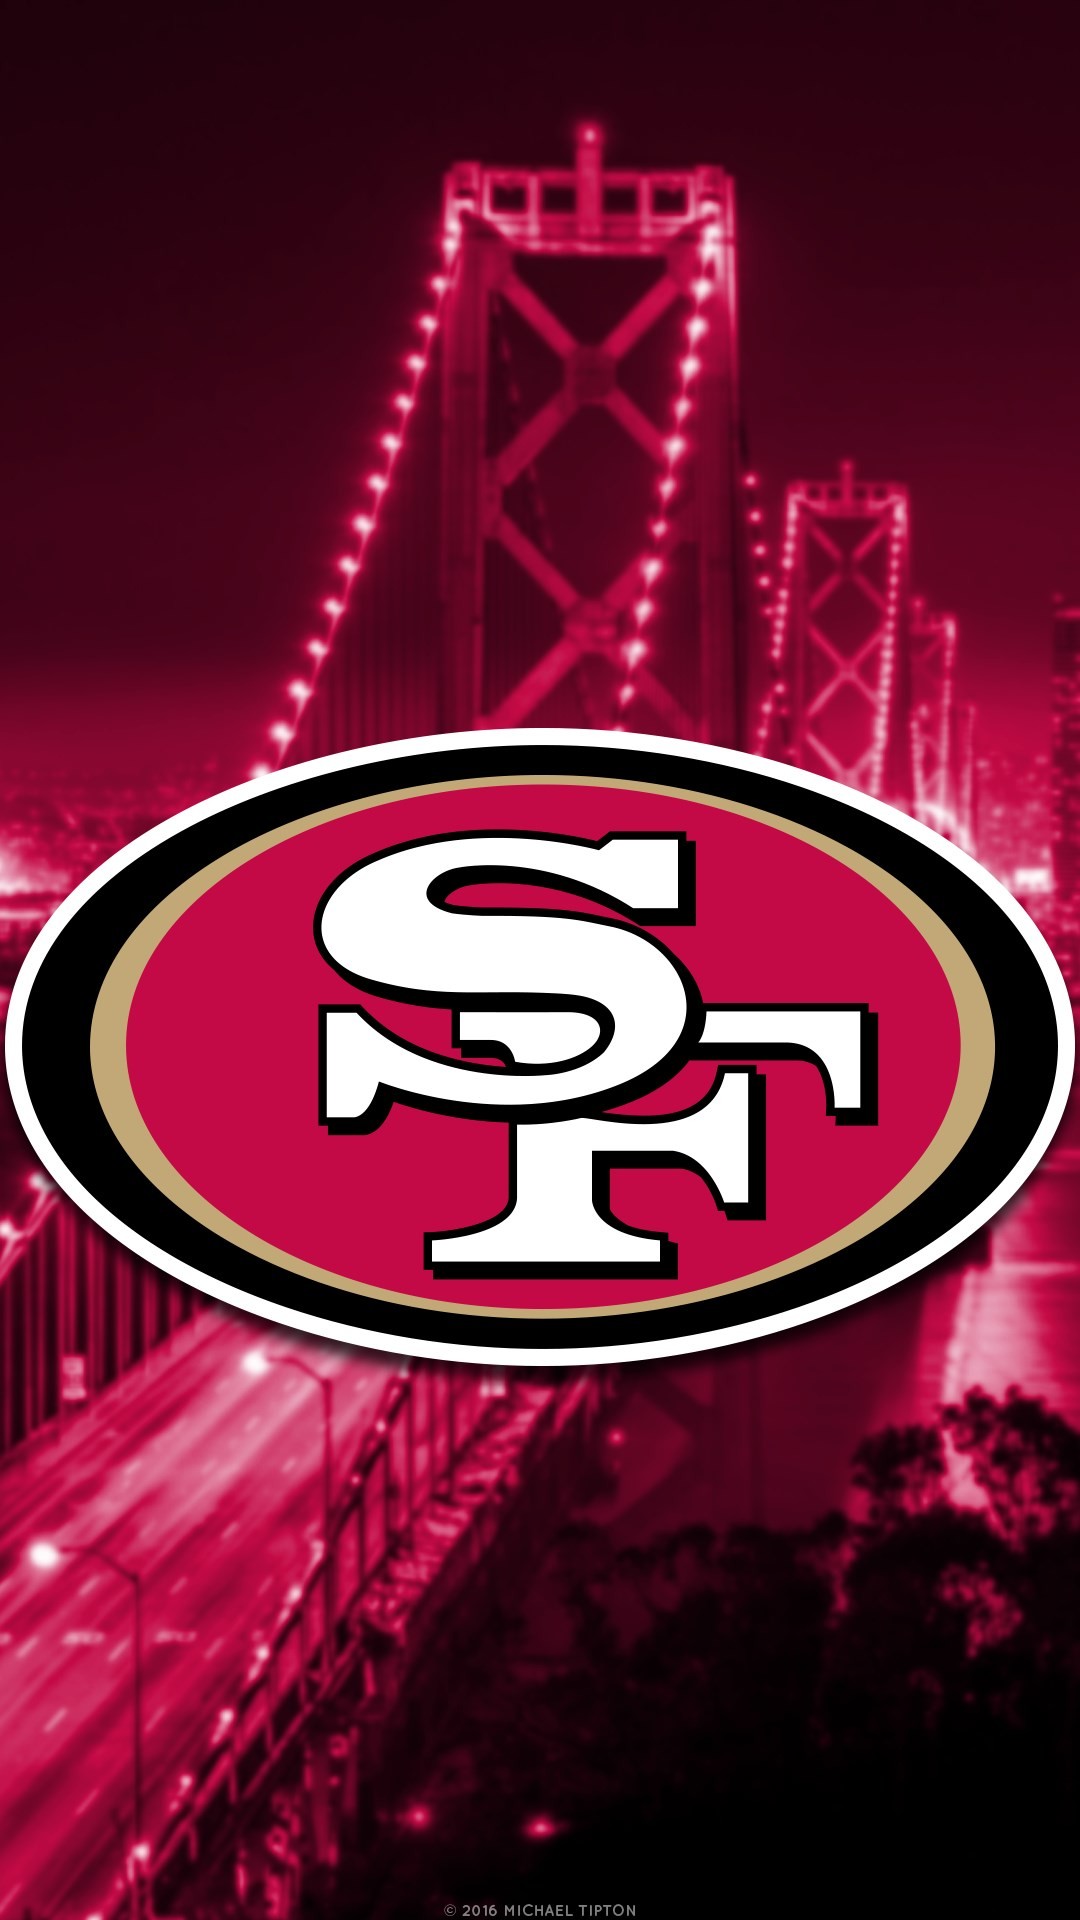 1080x1920 49ers wallpaper for galaxy s5